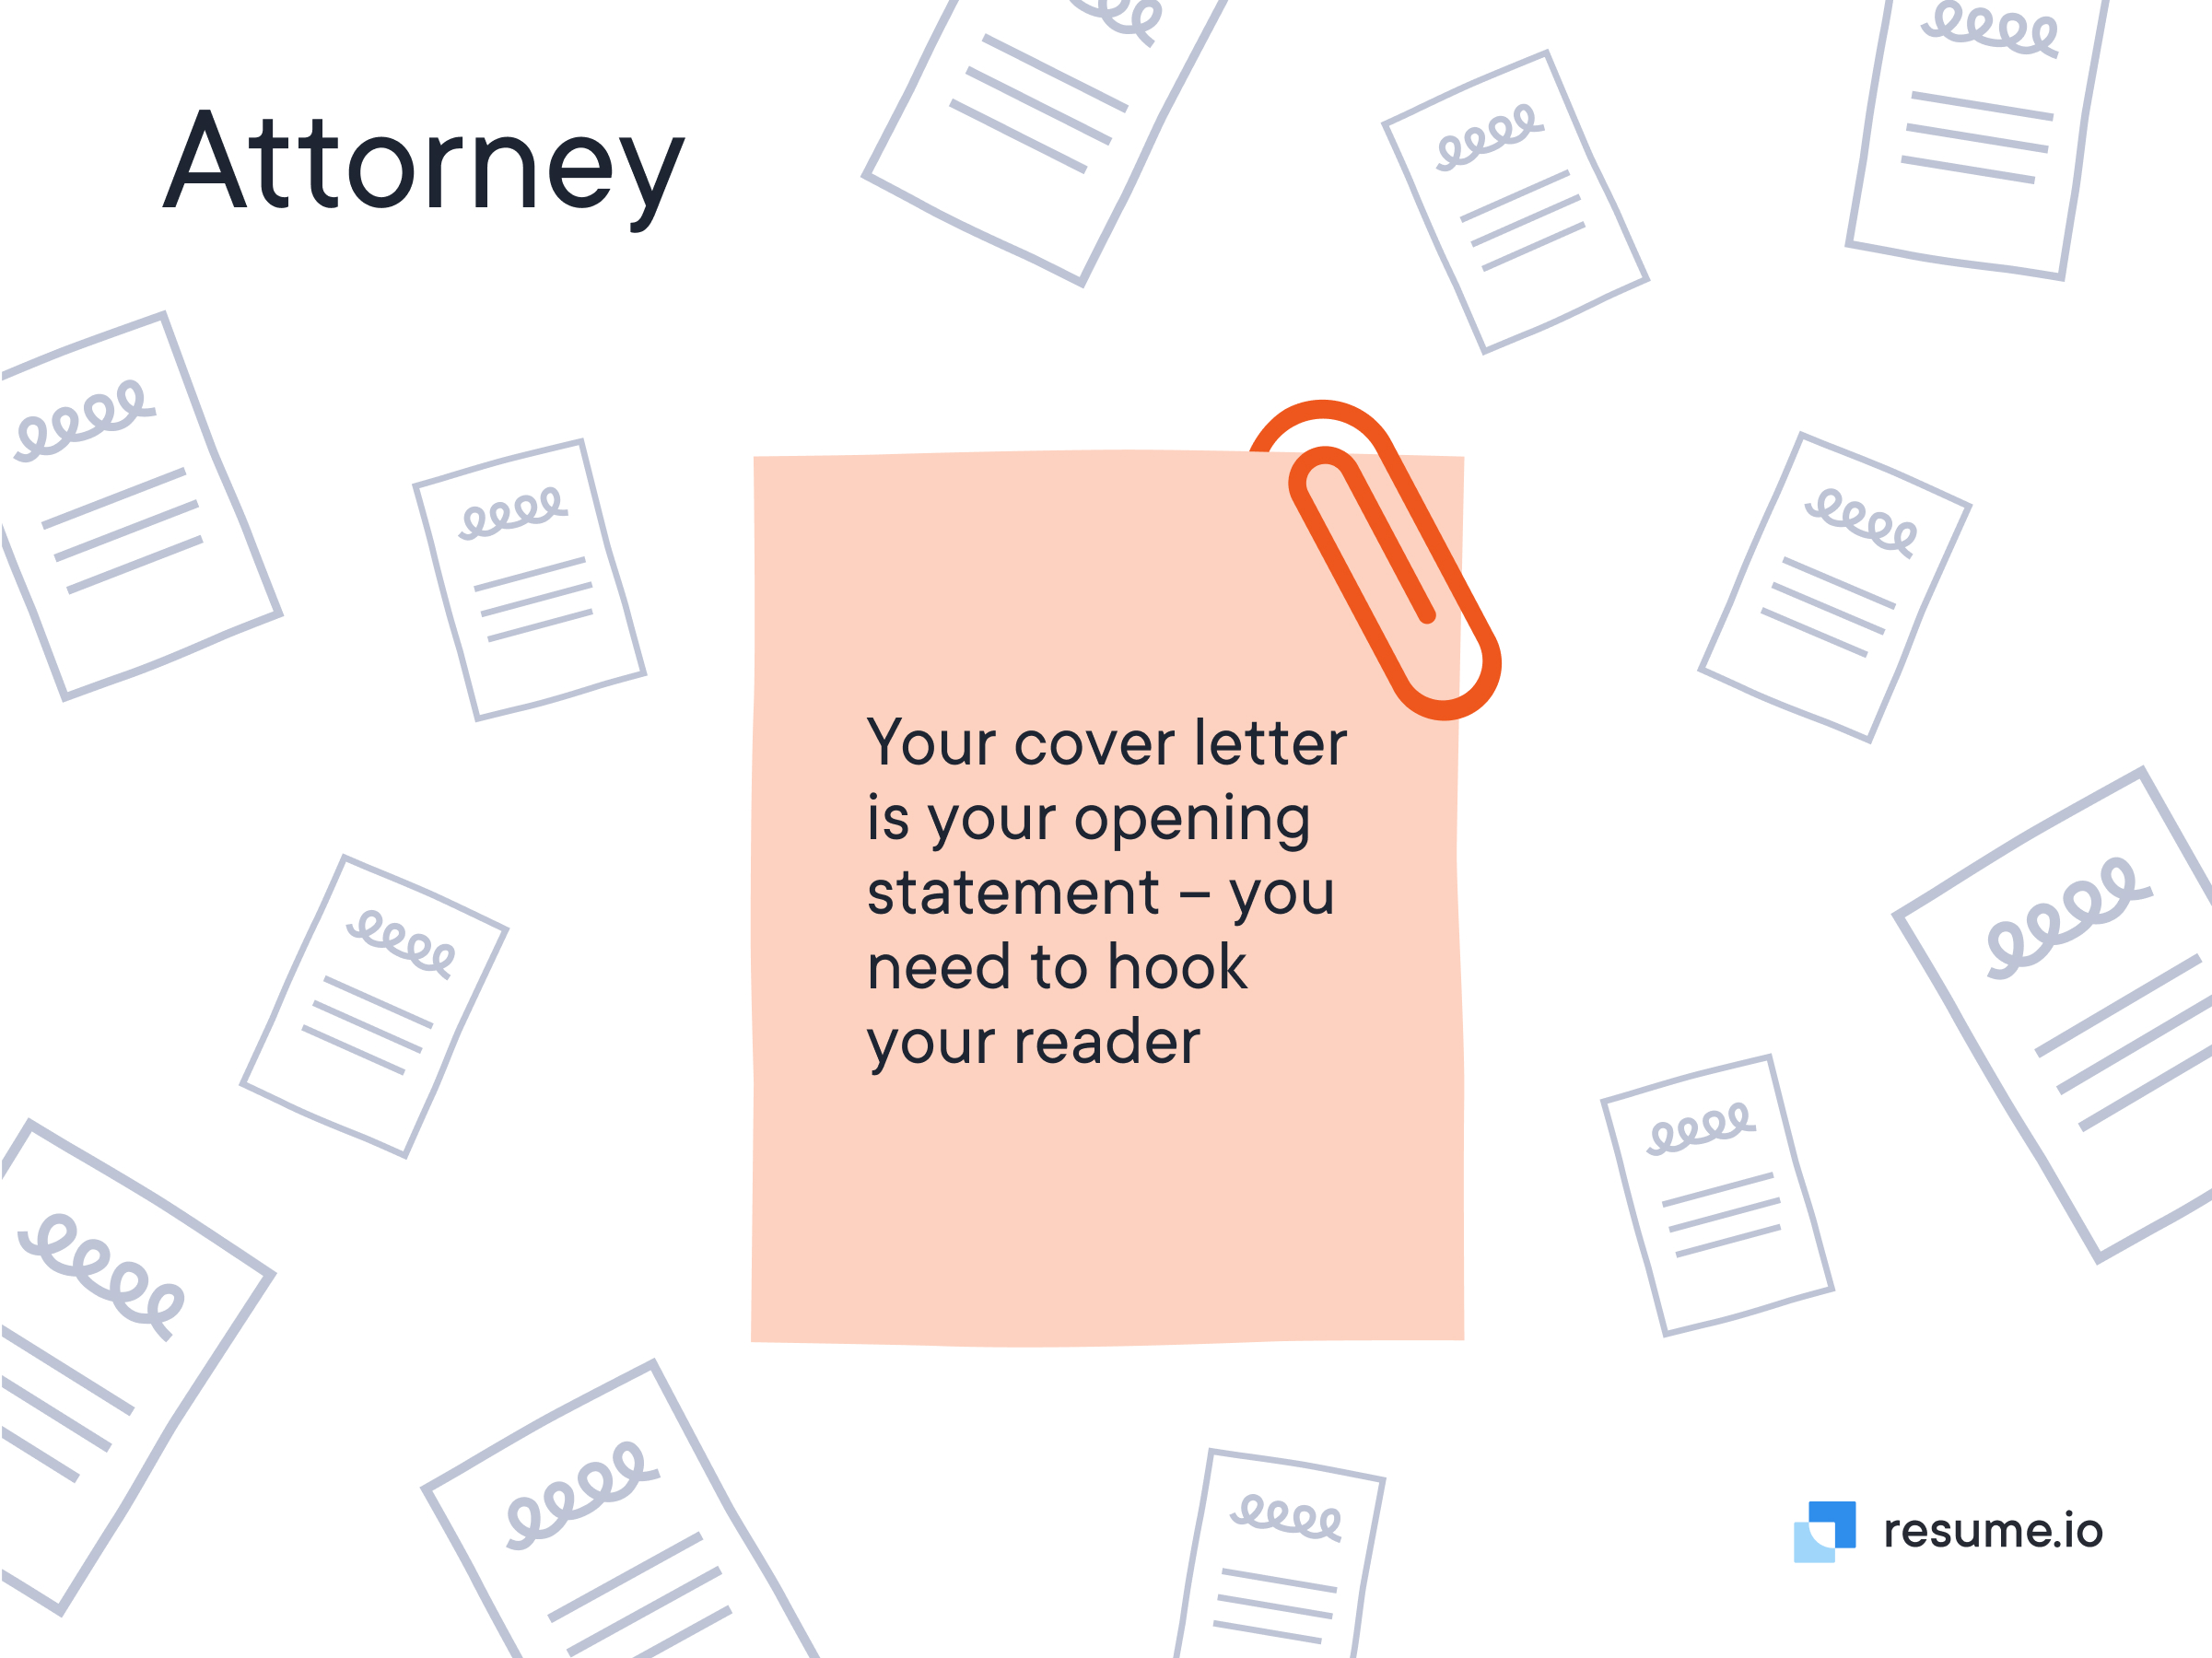 Attorney cover letter is your opening statement, hook your reader